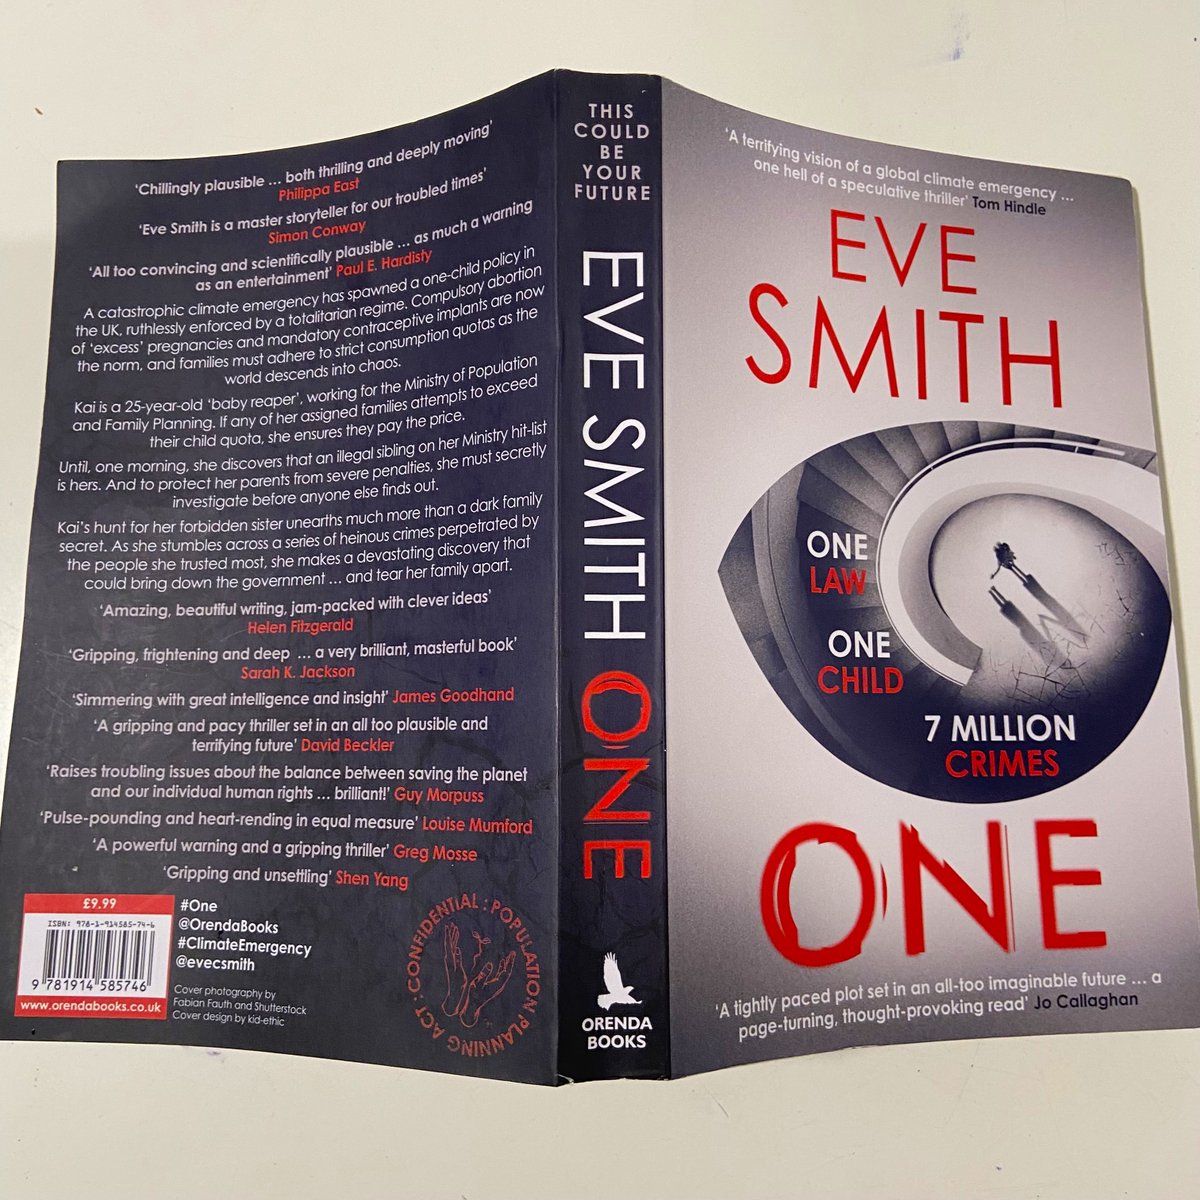 #TheOne by @evecsmith is set in a terrifyingly plausible futuristic Britain, where overcrowding + lack of resources has spawned a One-Child policy ruthlessly enforced by a totalitarian regime. Intelligent, gripping, fast-paced. One of the best dystopian thrillers I've read!